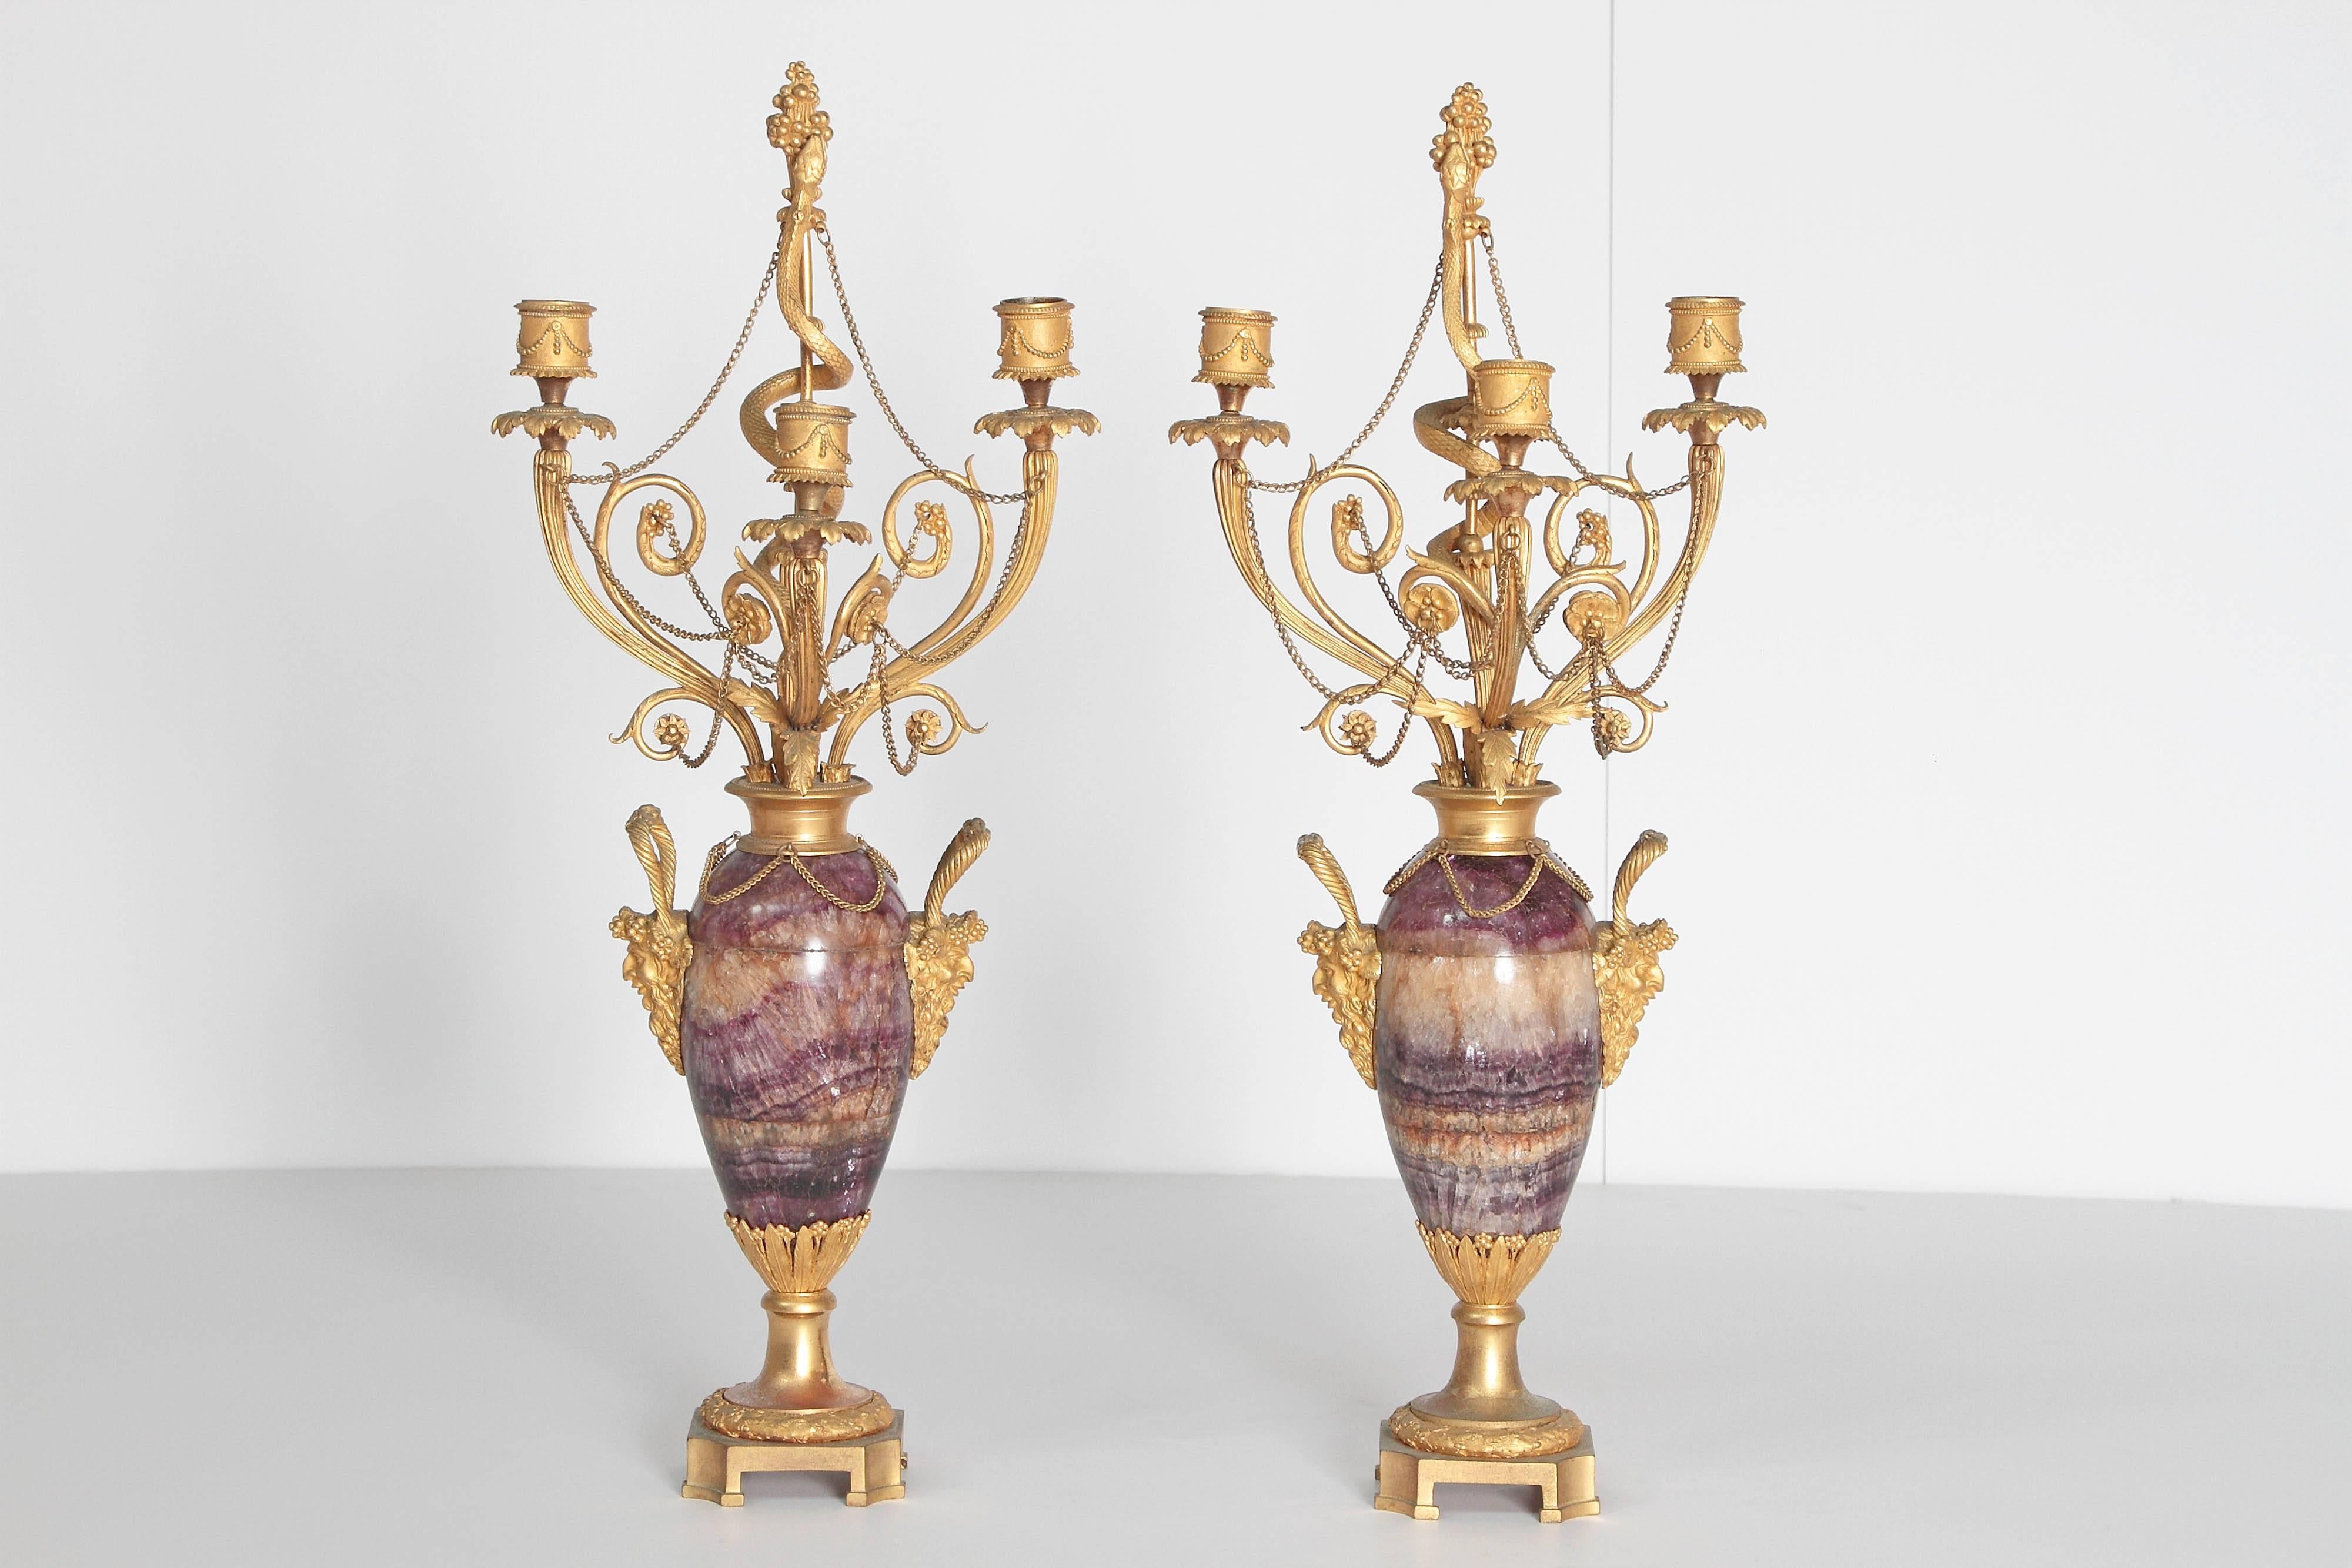 Neoclassical / Louis XVI-style gilt bronze mounted Blue John candelabra with Bacchus masks as handles each side, three (3) candleholders and center stem with serpent ascending, additional floral decorations and swags of gilt chain, 19th century